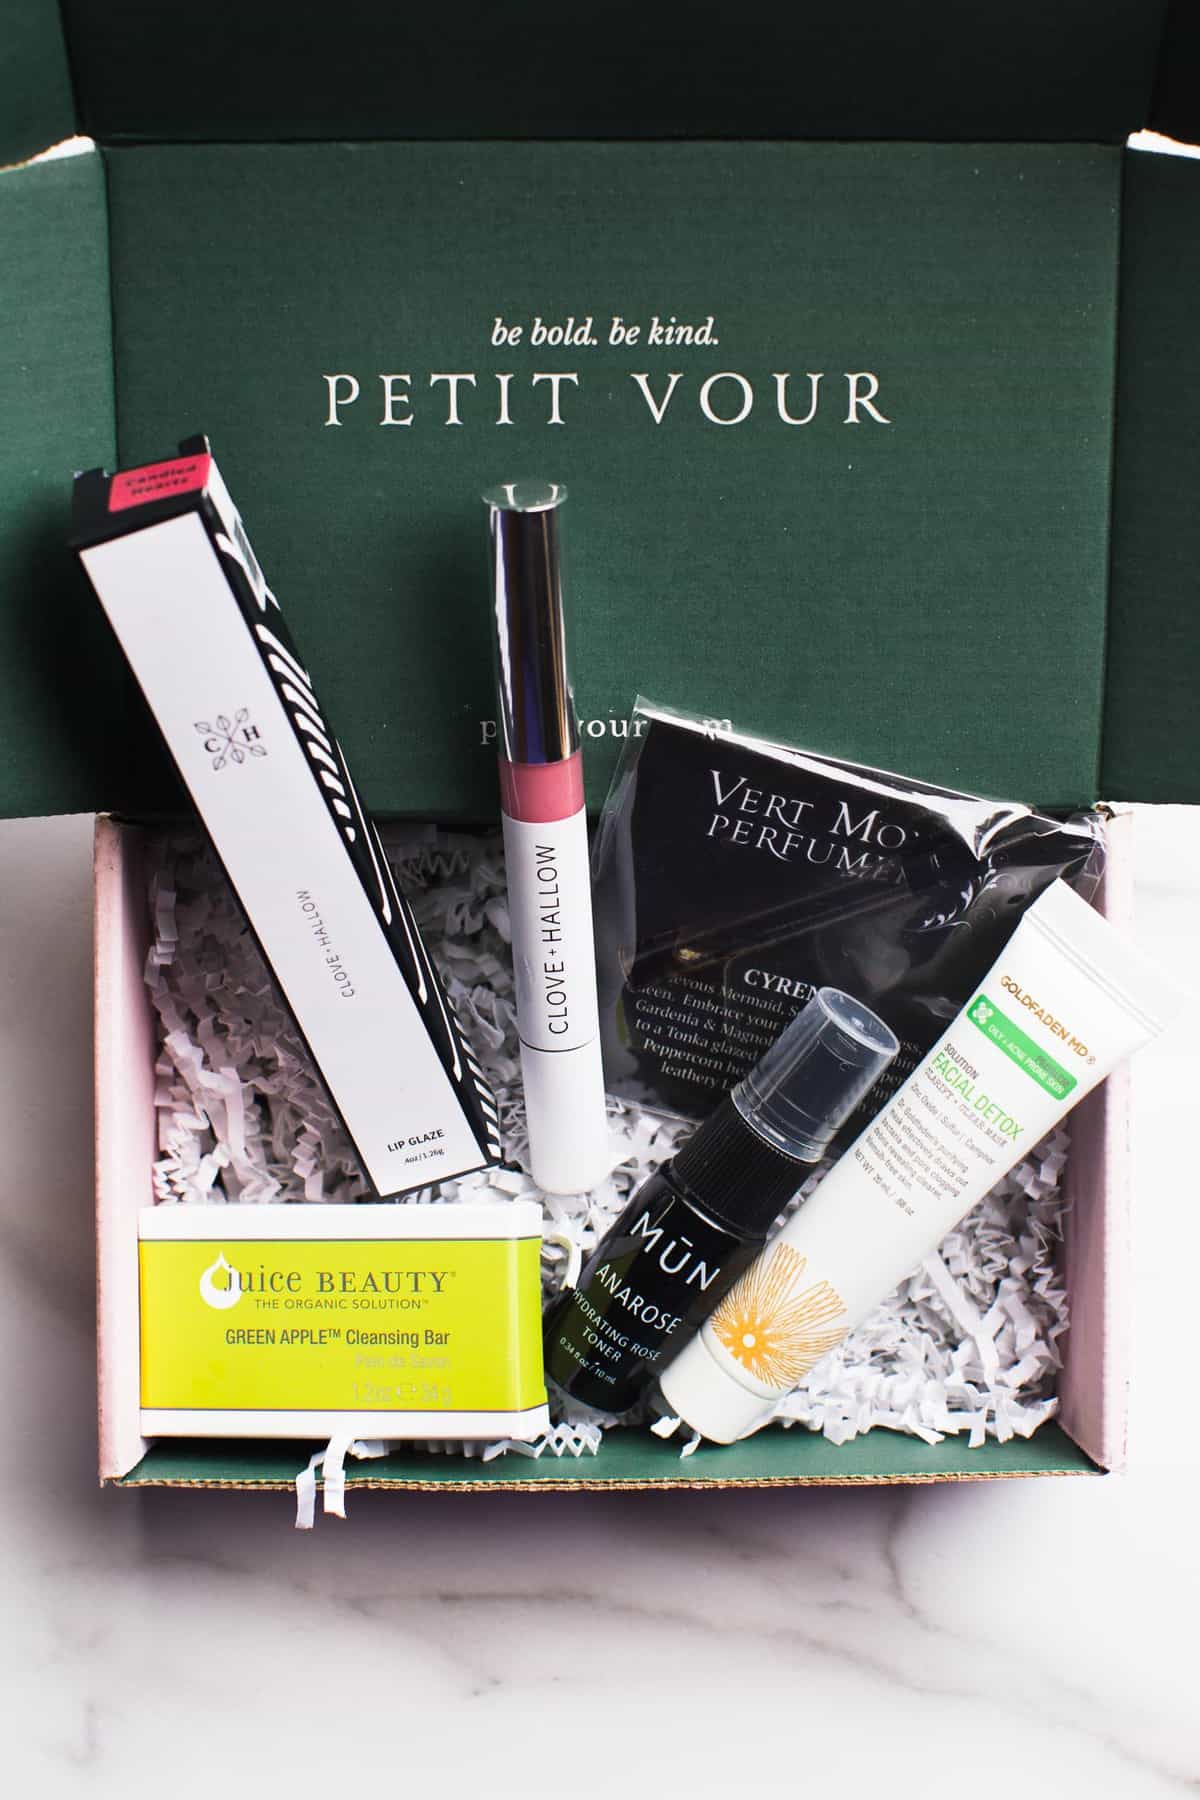 A selection of products from the June 2018 Petit Vour box.